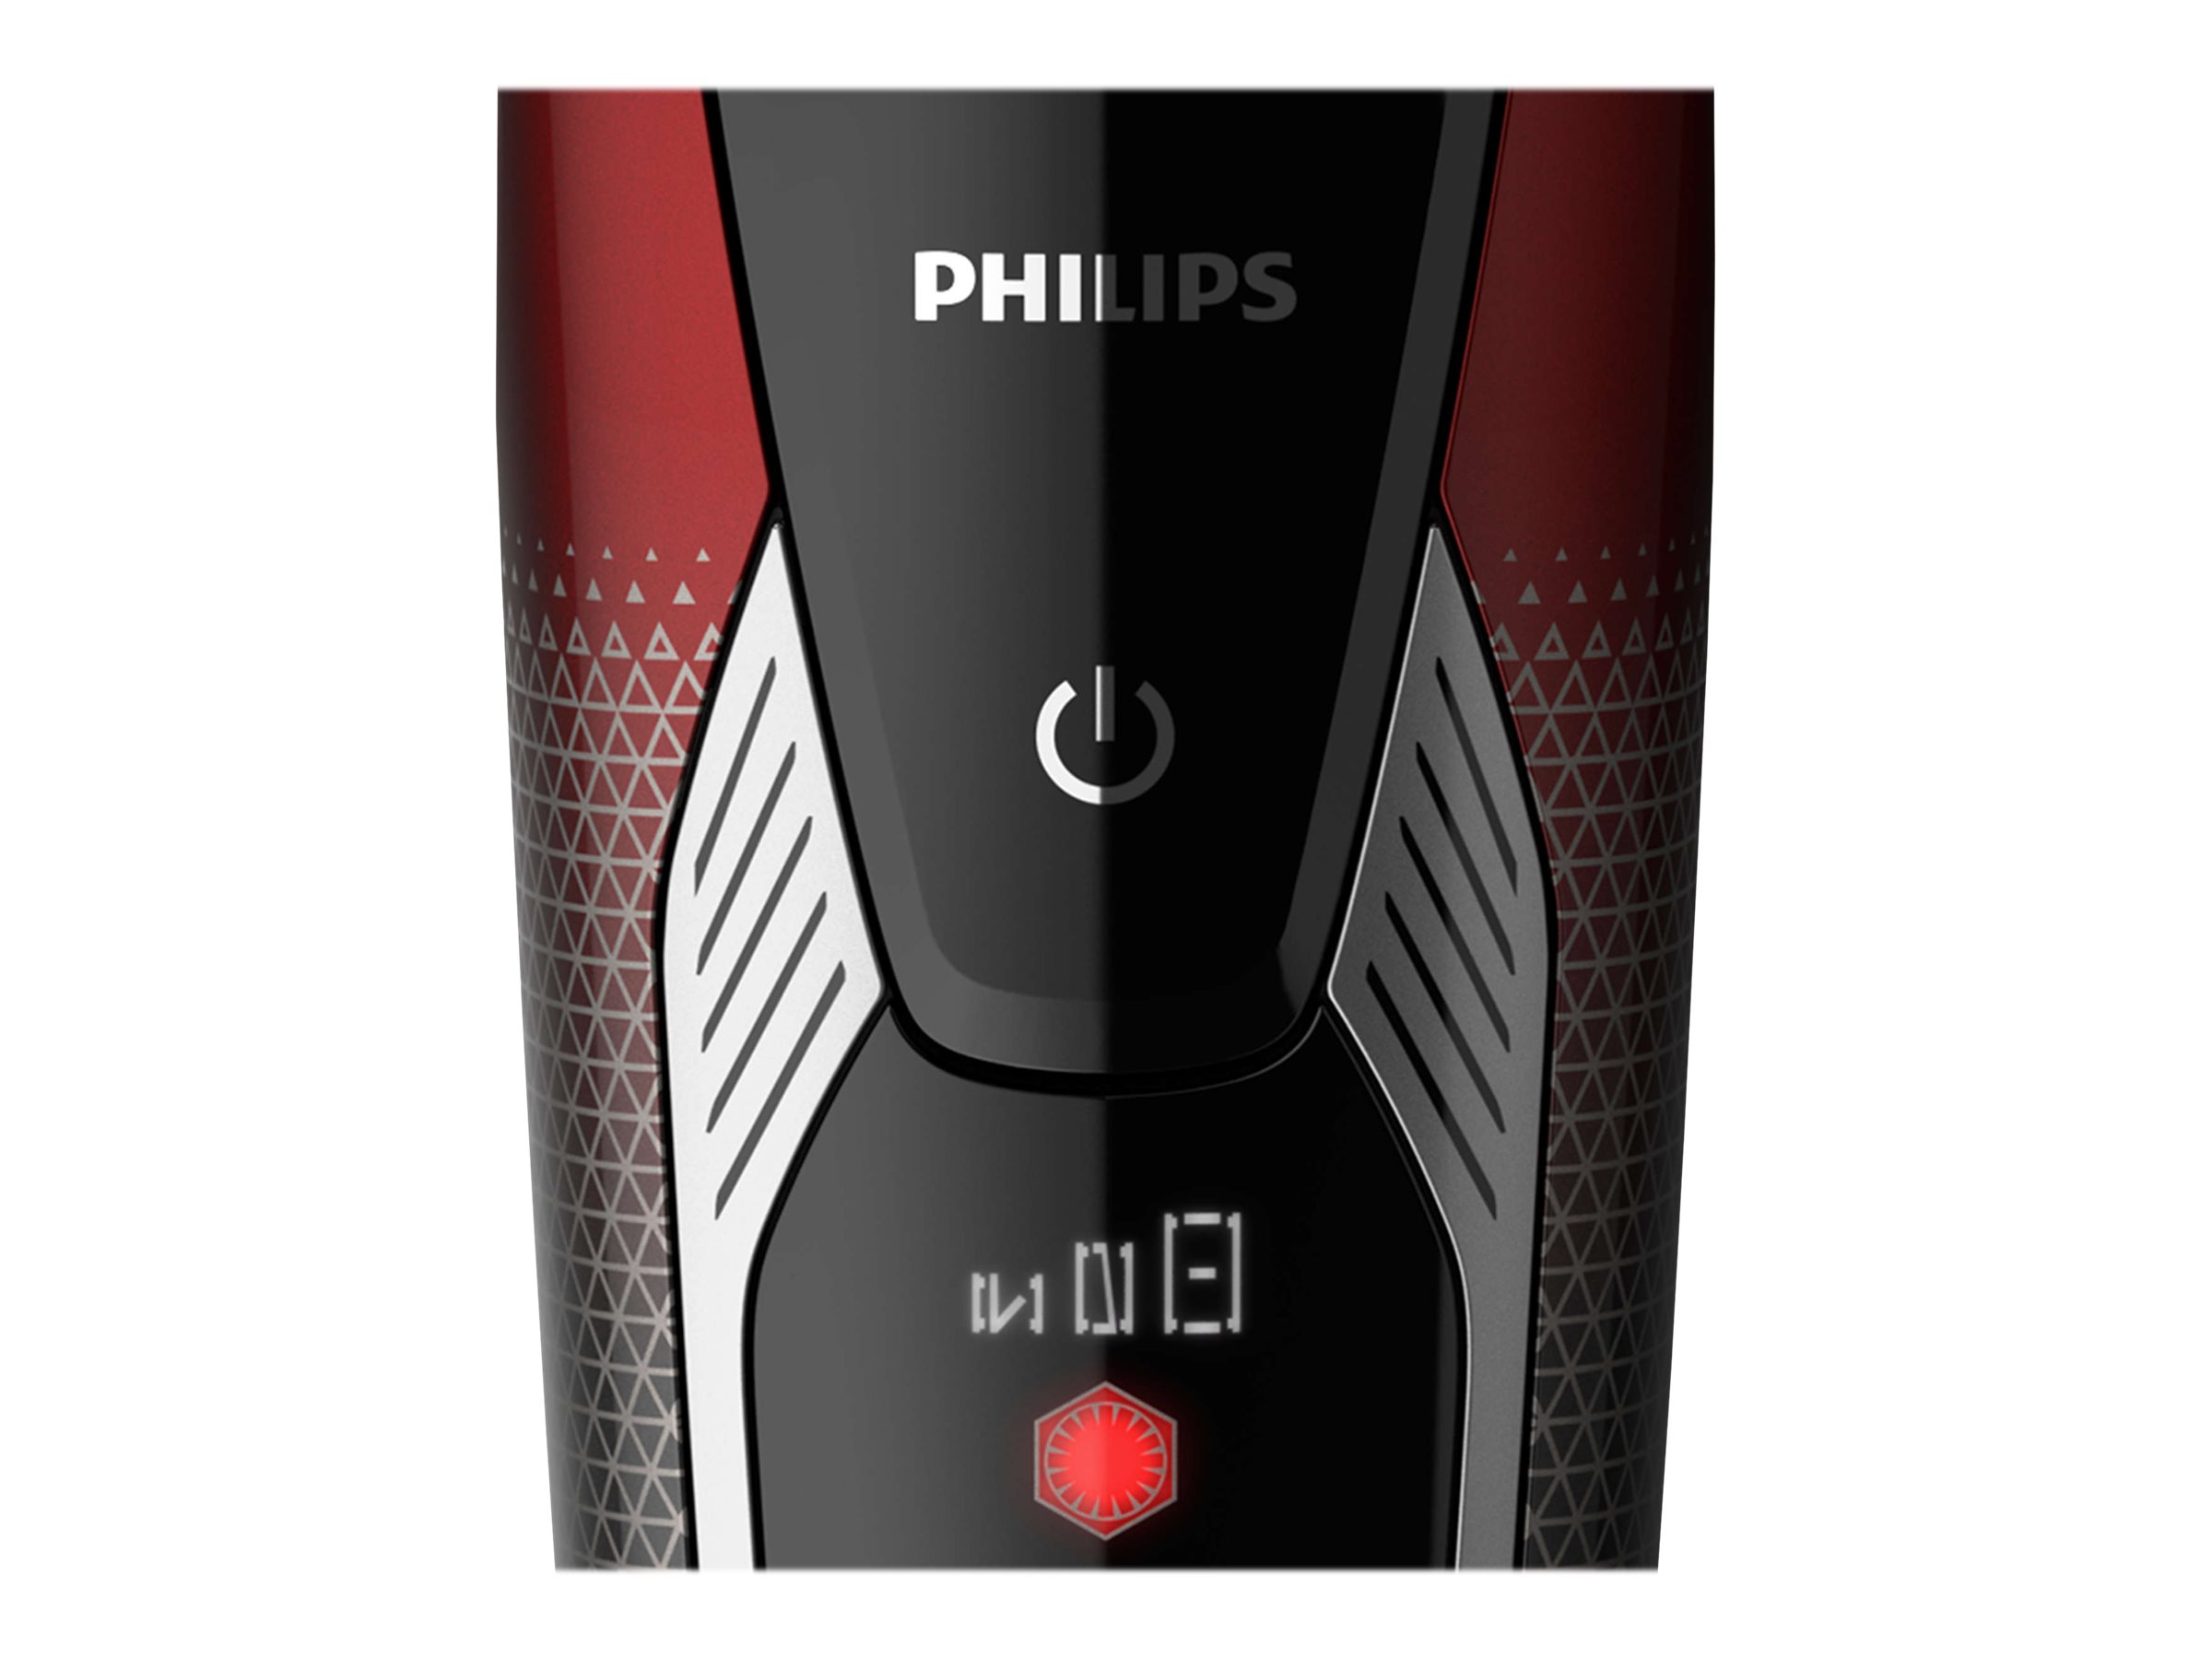 Philips Norelco SW9700 Star Wars Dark Side - Shaver - cordless - image 5 of 12